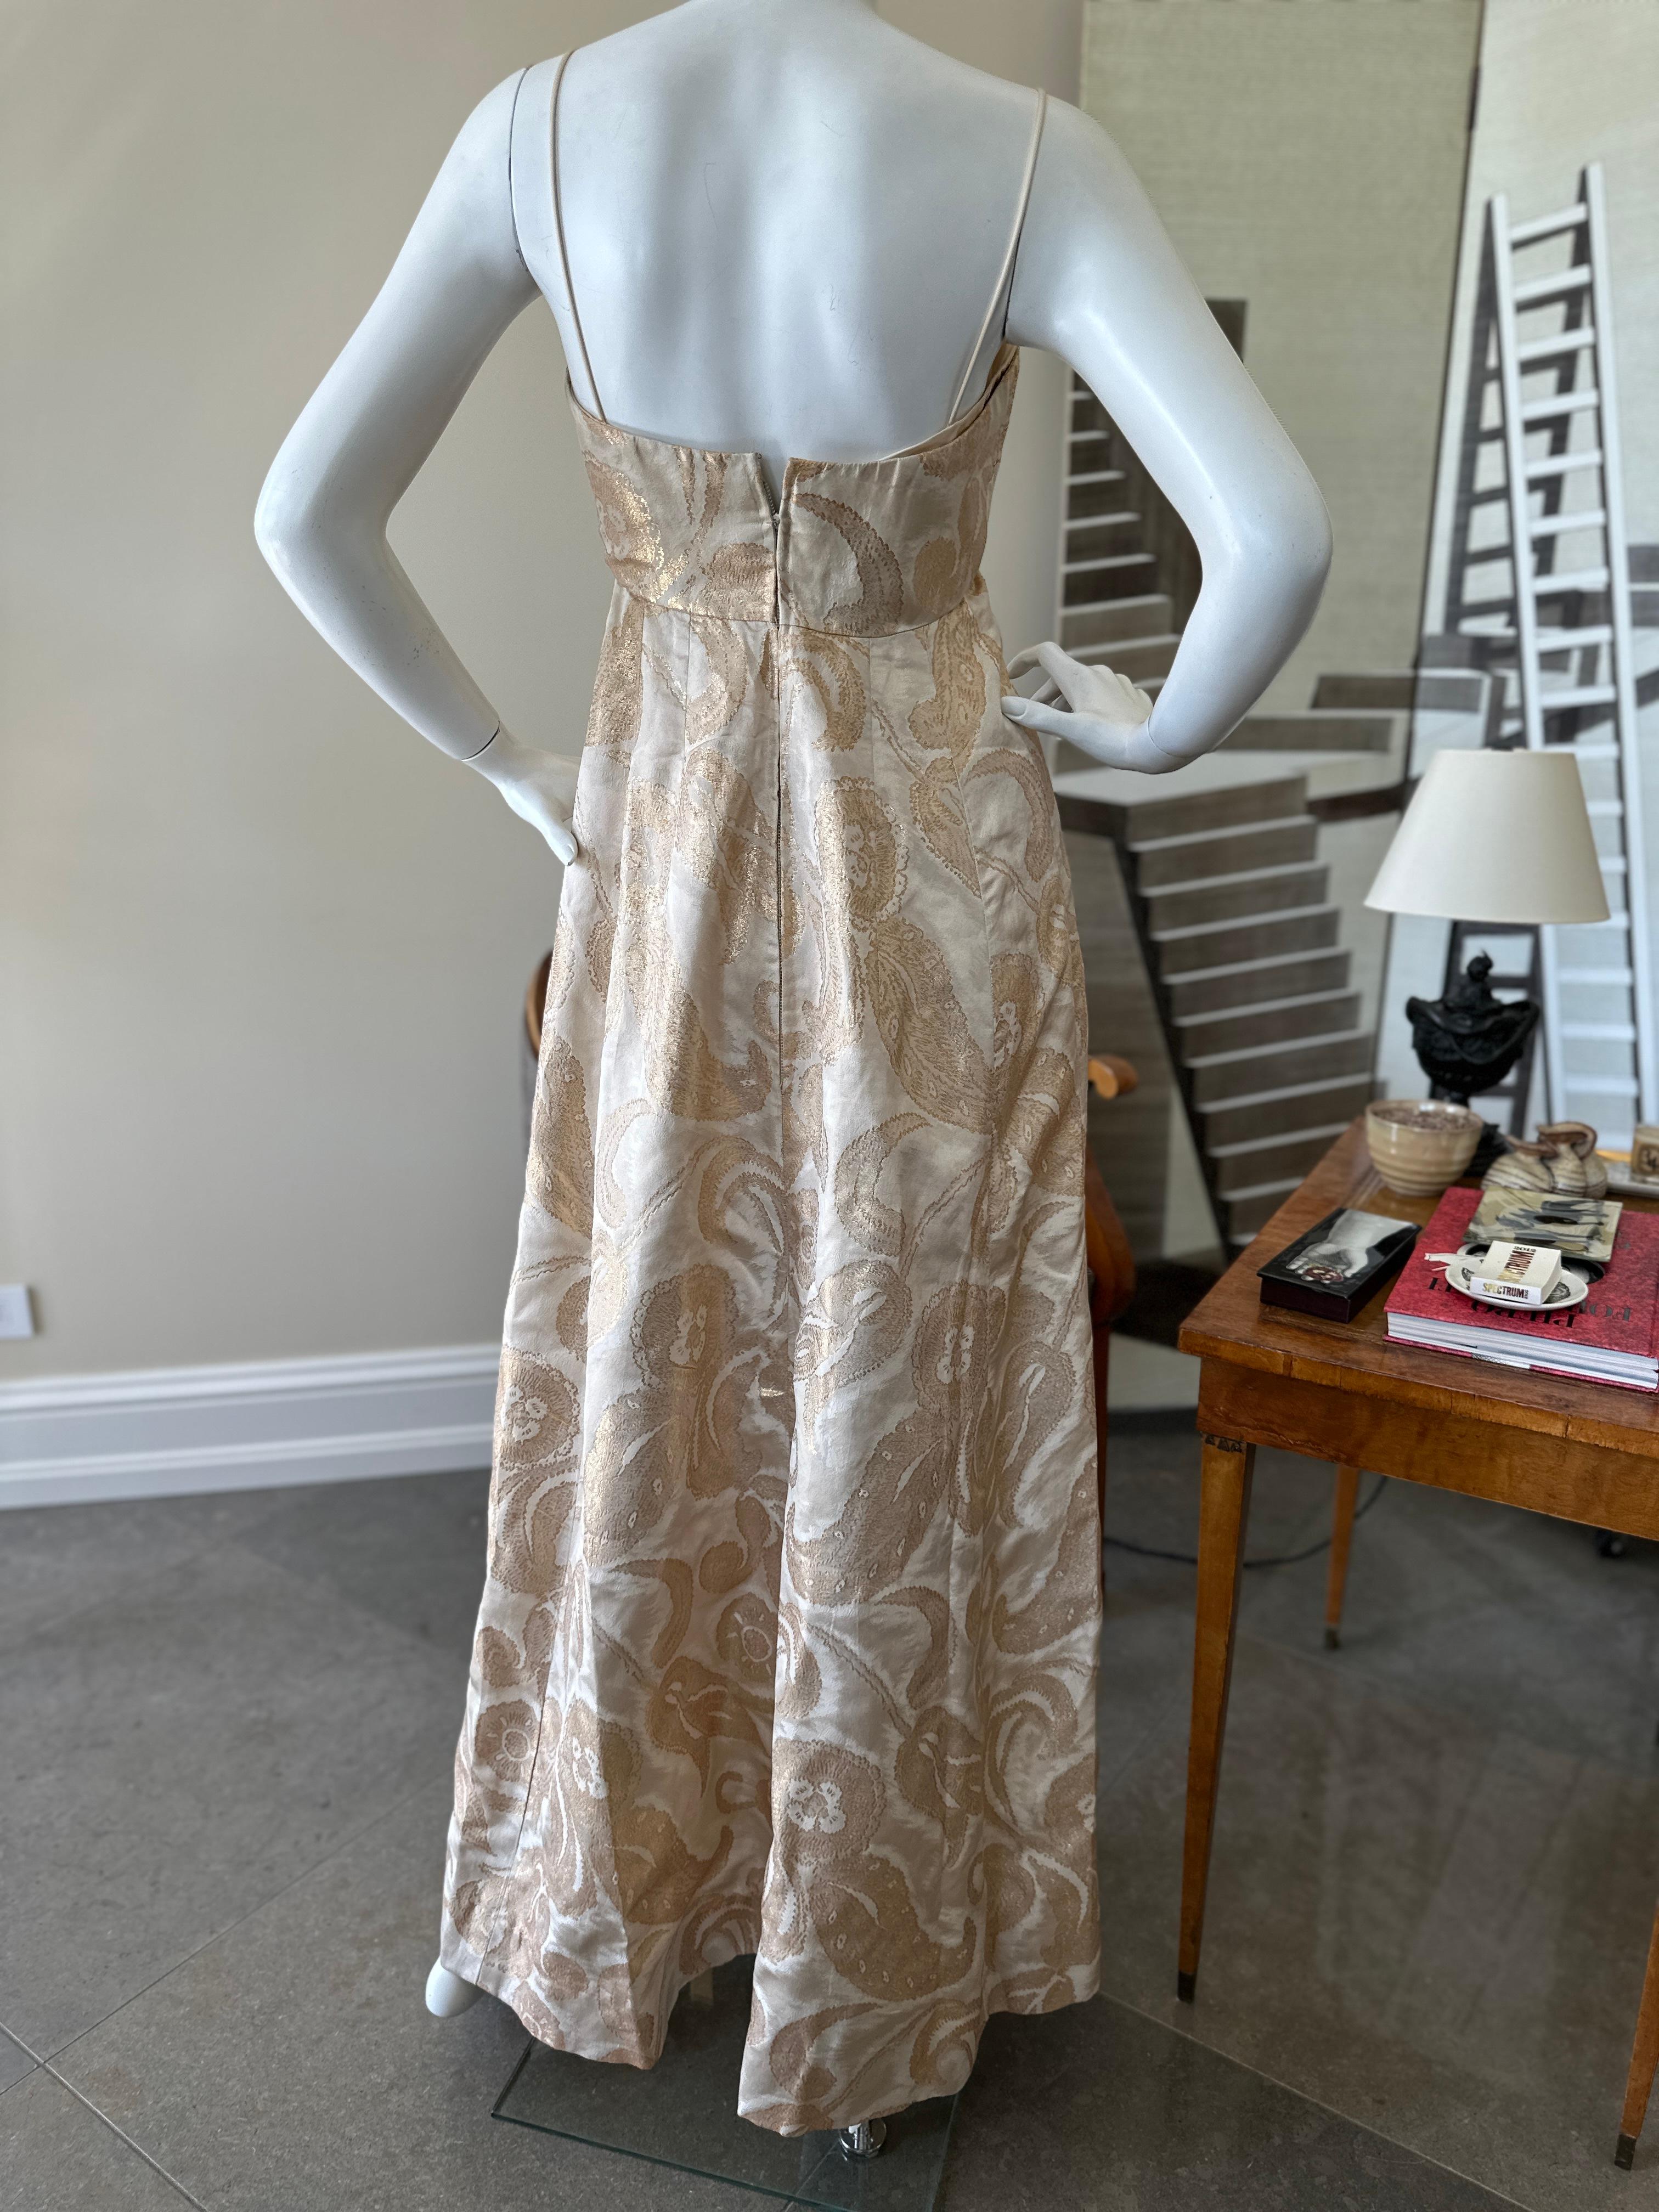  Malcolm Starr Vintage Gold Brocade Evening Dress.
This is outstanding , I love it.
 Size S
  Bust 34